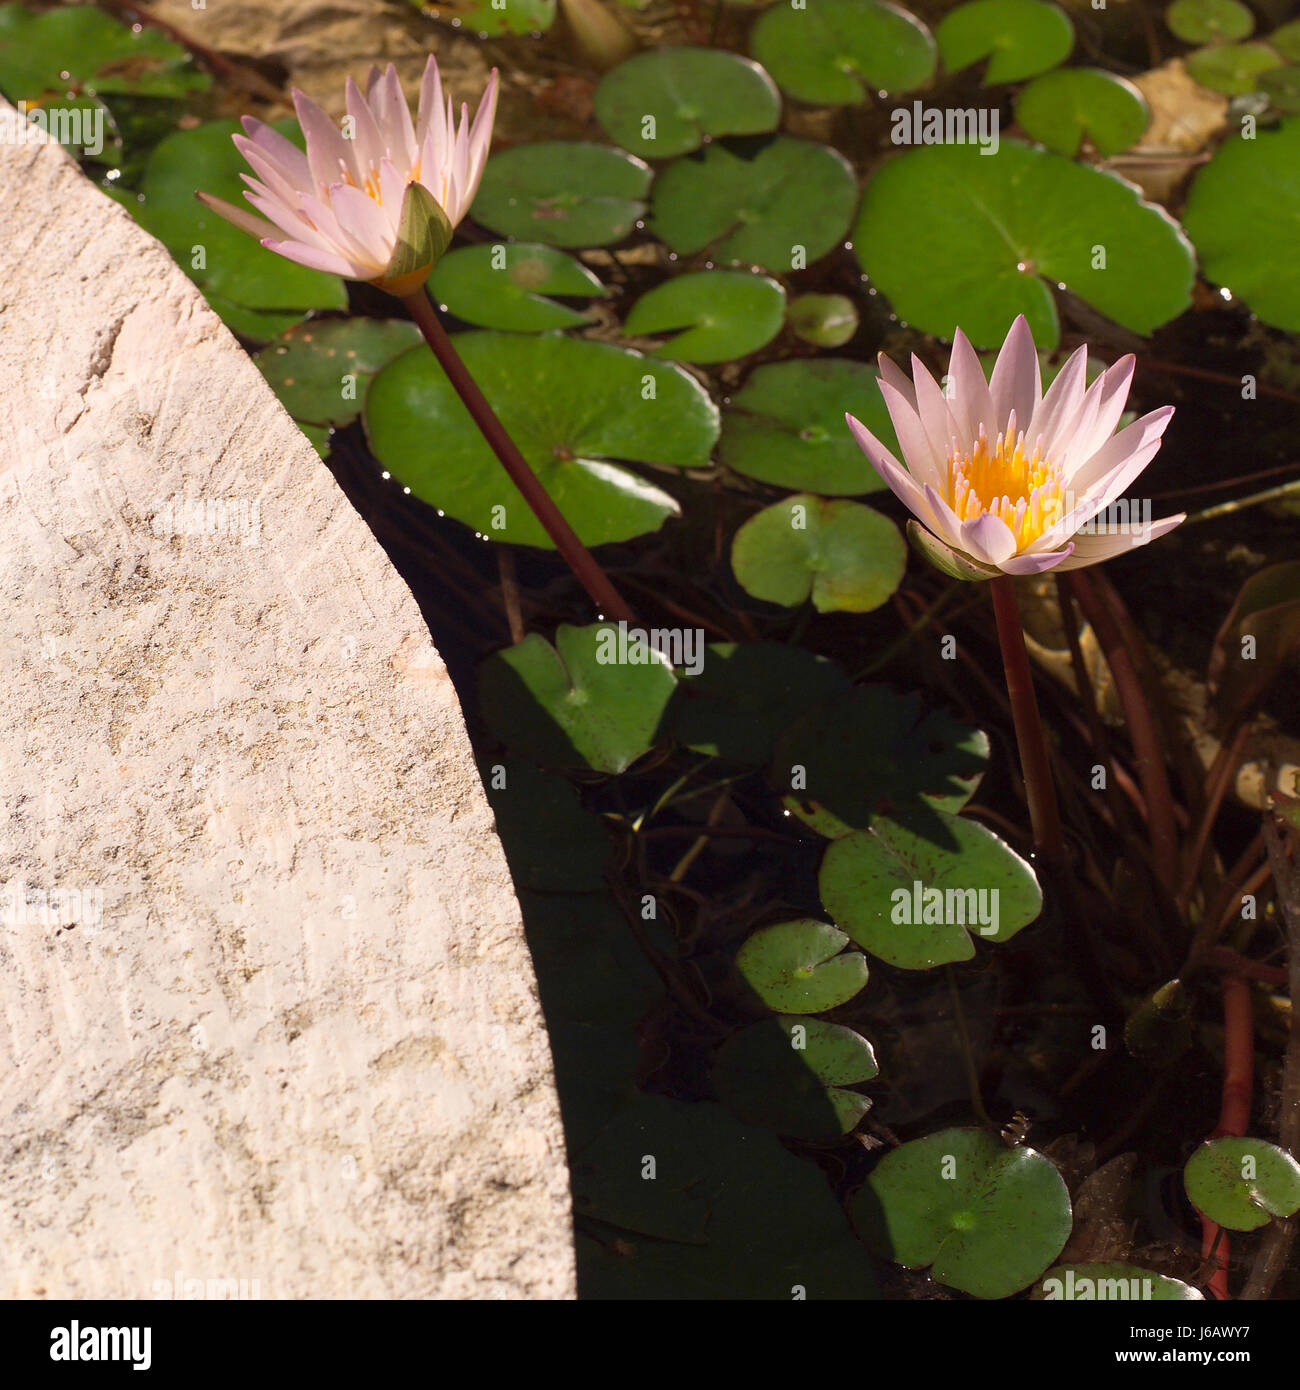 leaf flower plant leaves flowers lily fresh water pond water tropical lilies Stock Photo